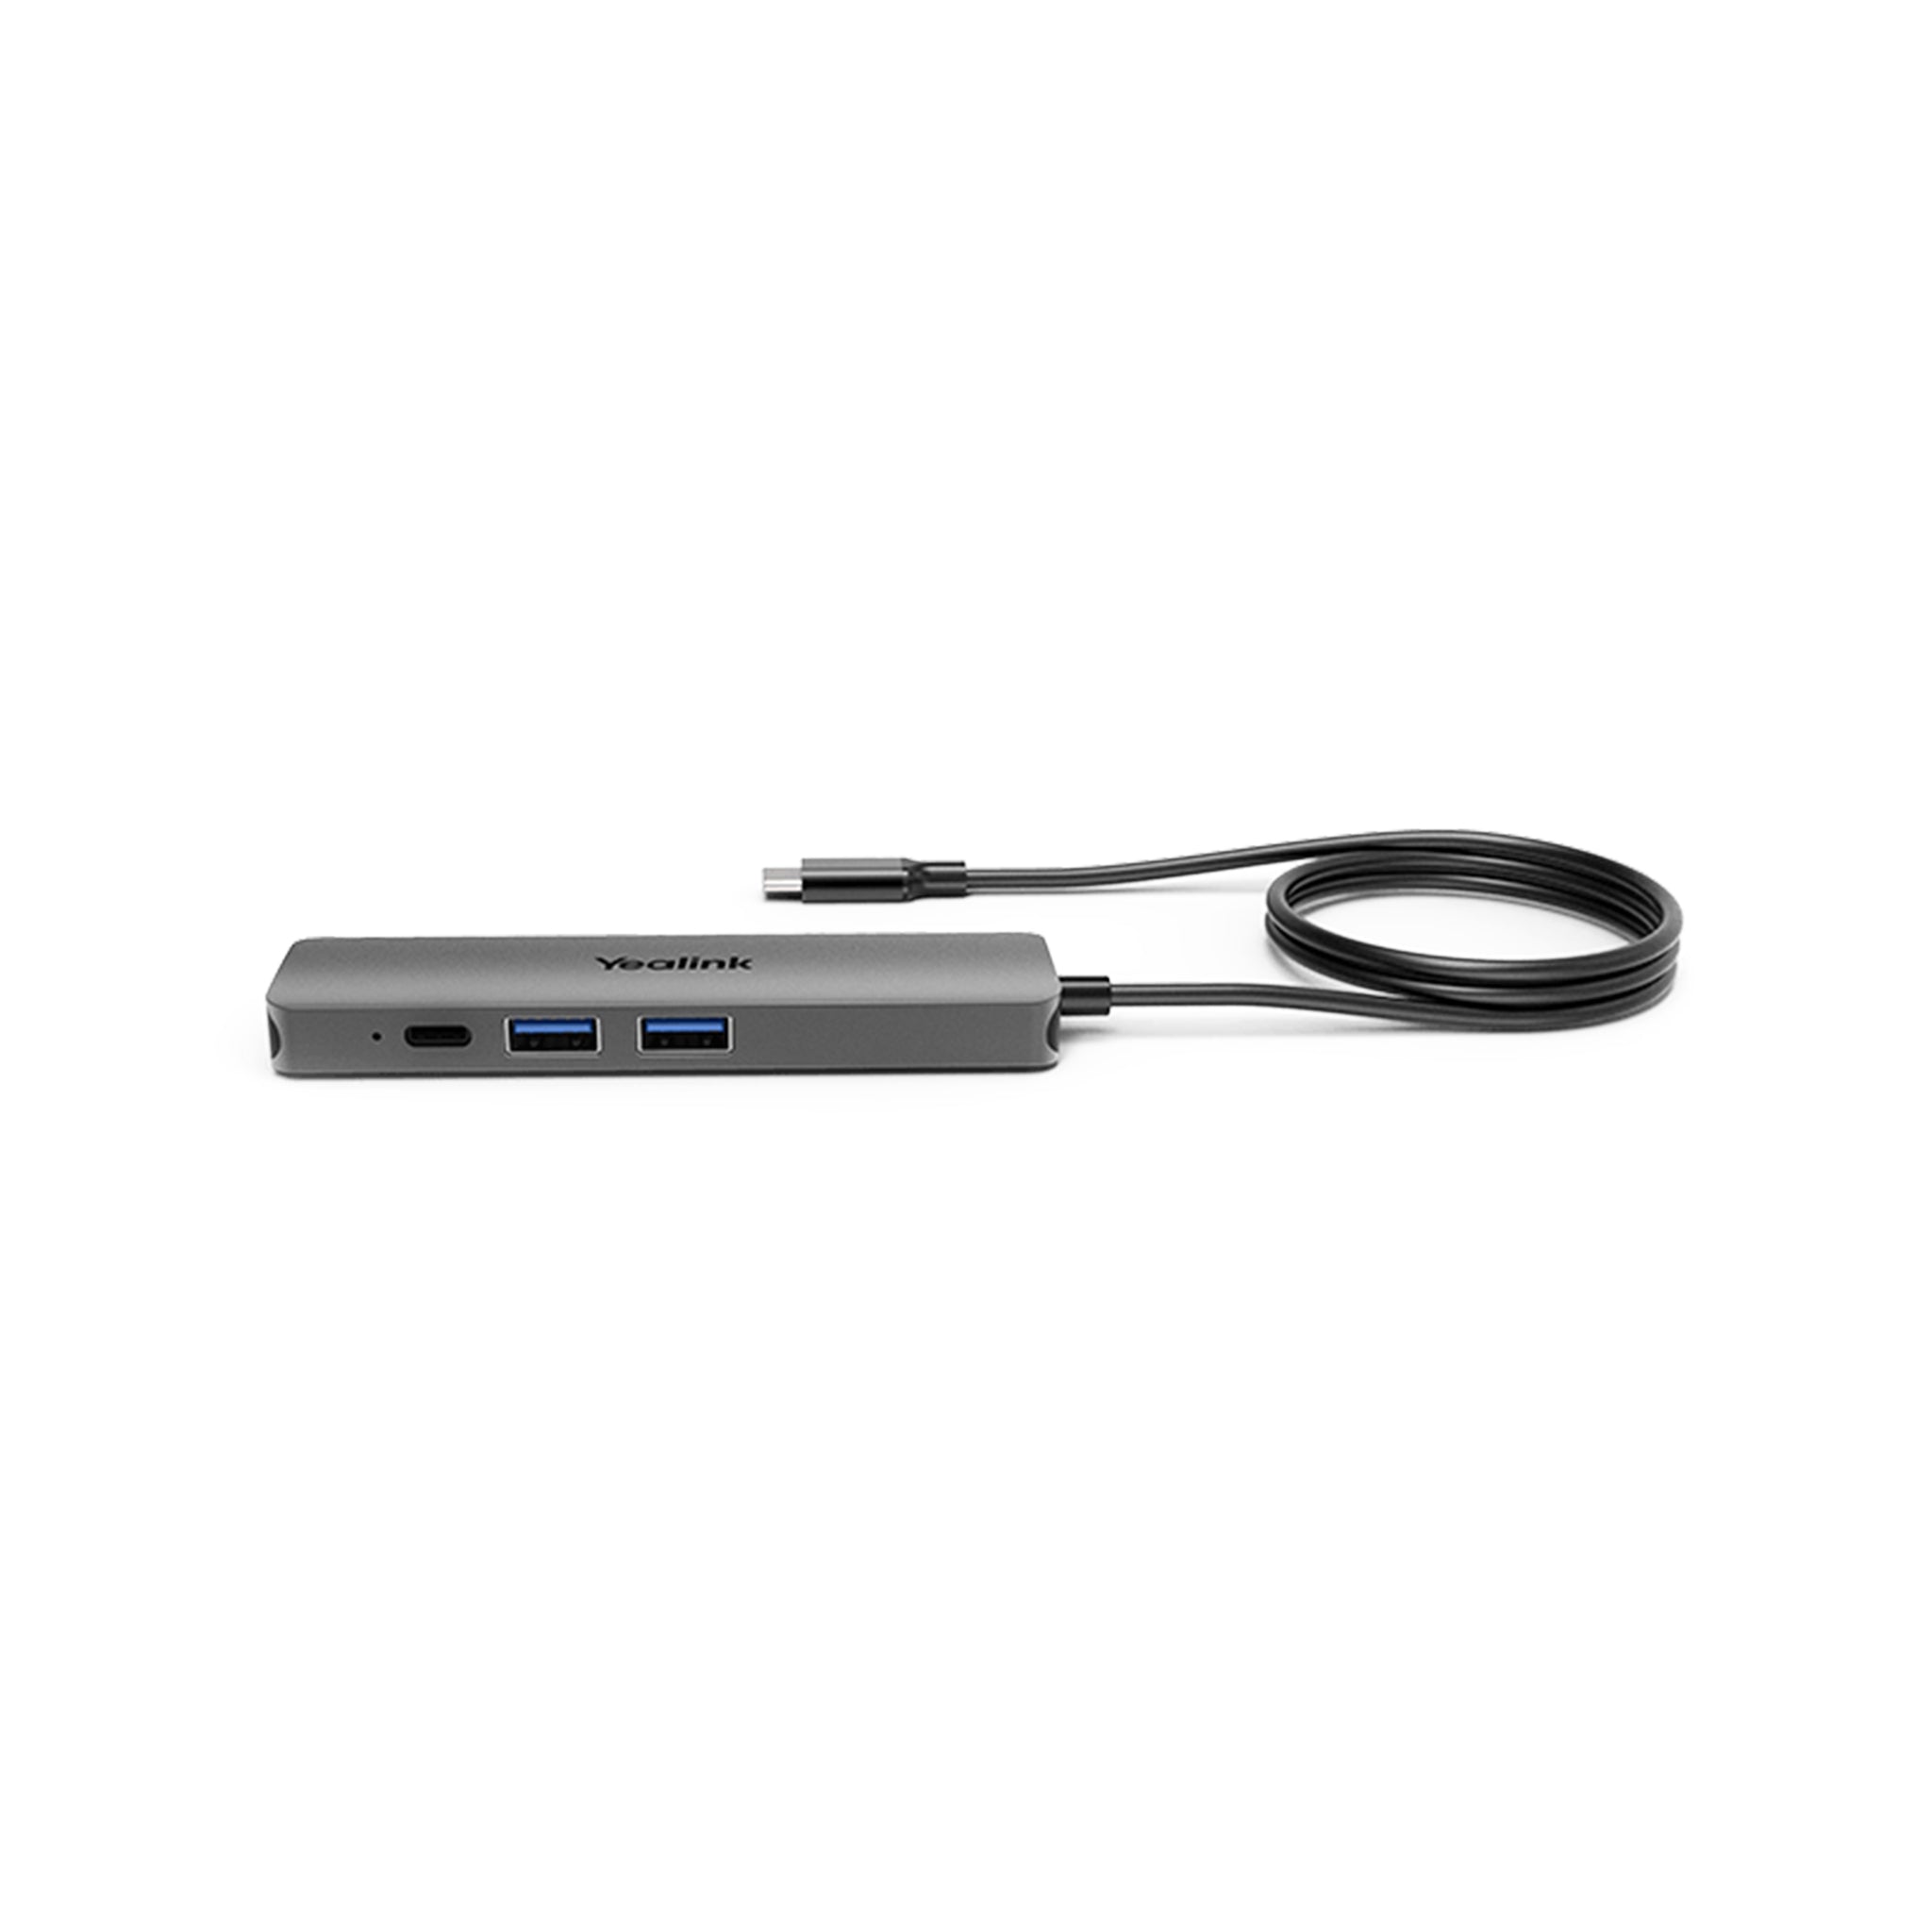 Yealink UVC30-CP900-BYOD - Small to Huddle Meeting Kit UVC30-CP900-BYOD, Video Conferencing Room, 4K Ultra HD